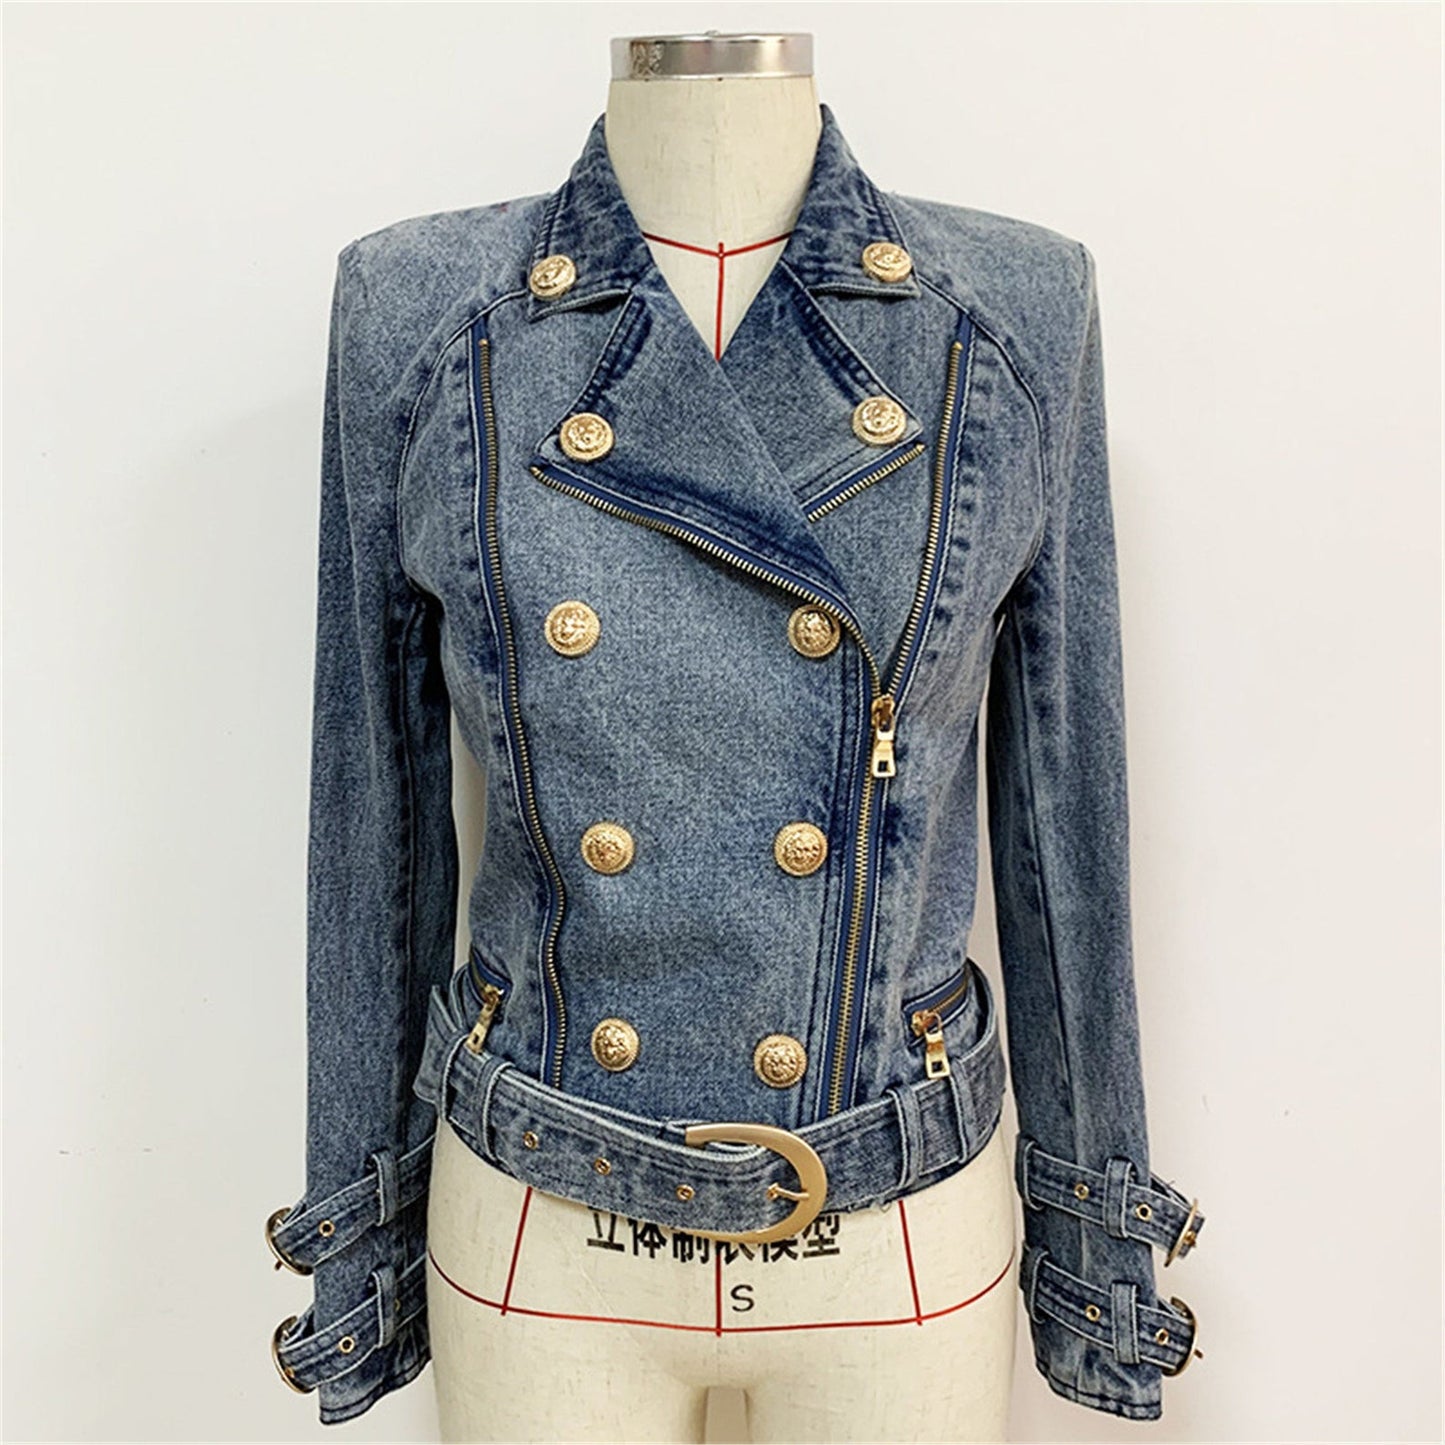 Women's Luxury Designer Inspired Denim Golden Buttons Biker Jacket Blazer  UK CUSTOMER SERVICE! Women's Luxury Designer Inspired Denim Golden Buttons Biker Jacket Blazer - light blue jacket is crafted from cotton denim that’s faded and gently distressed around the edges for a vintage look. It’s Italian made to a relaxed silhouette with chest patch  a zigzag-topstitched buttoned placket and buckled belt arm .